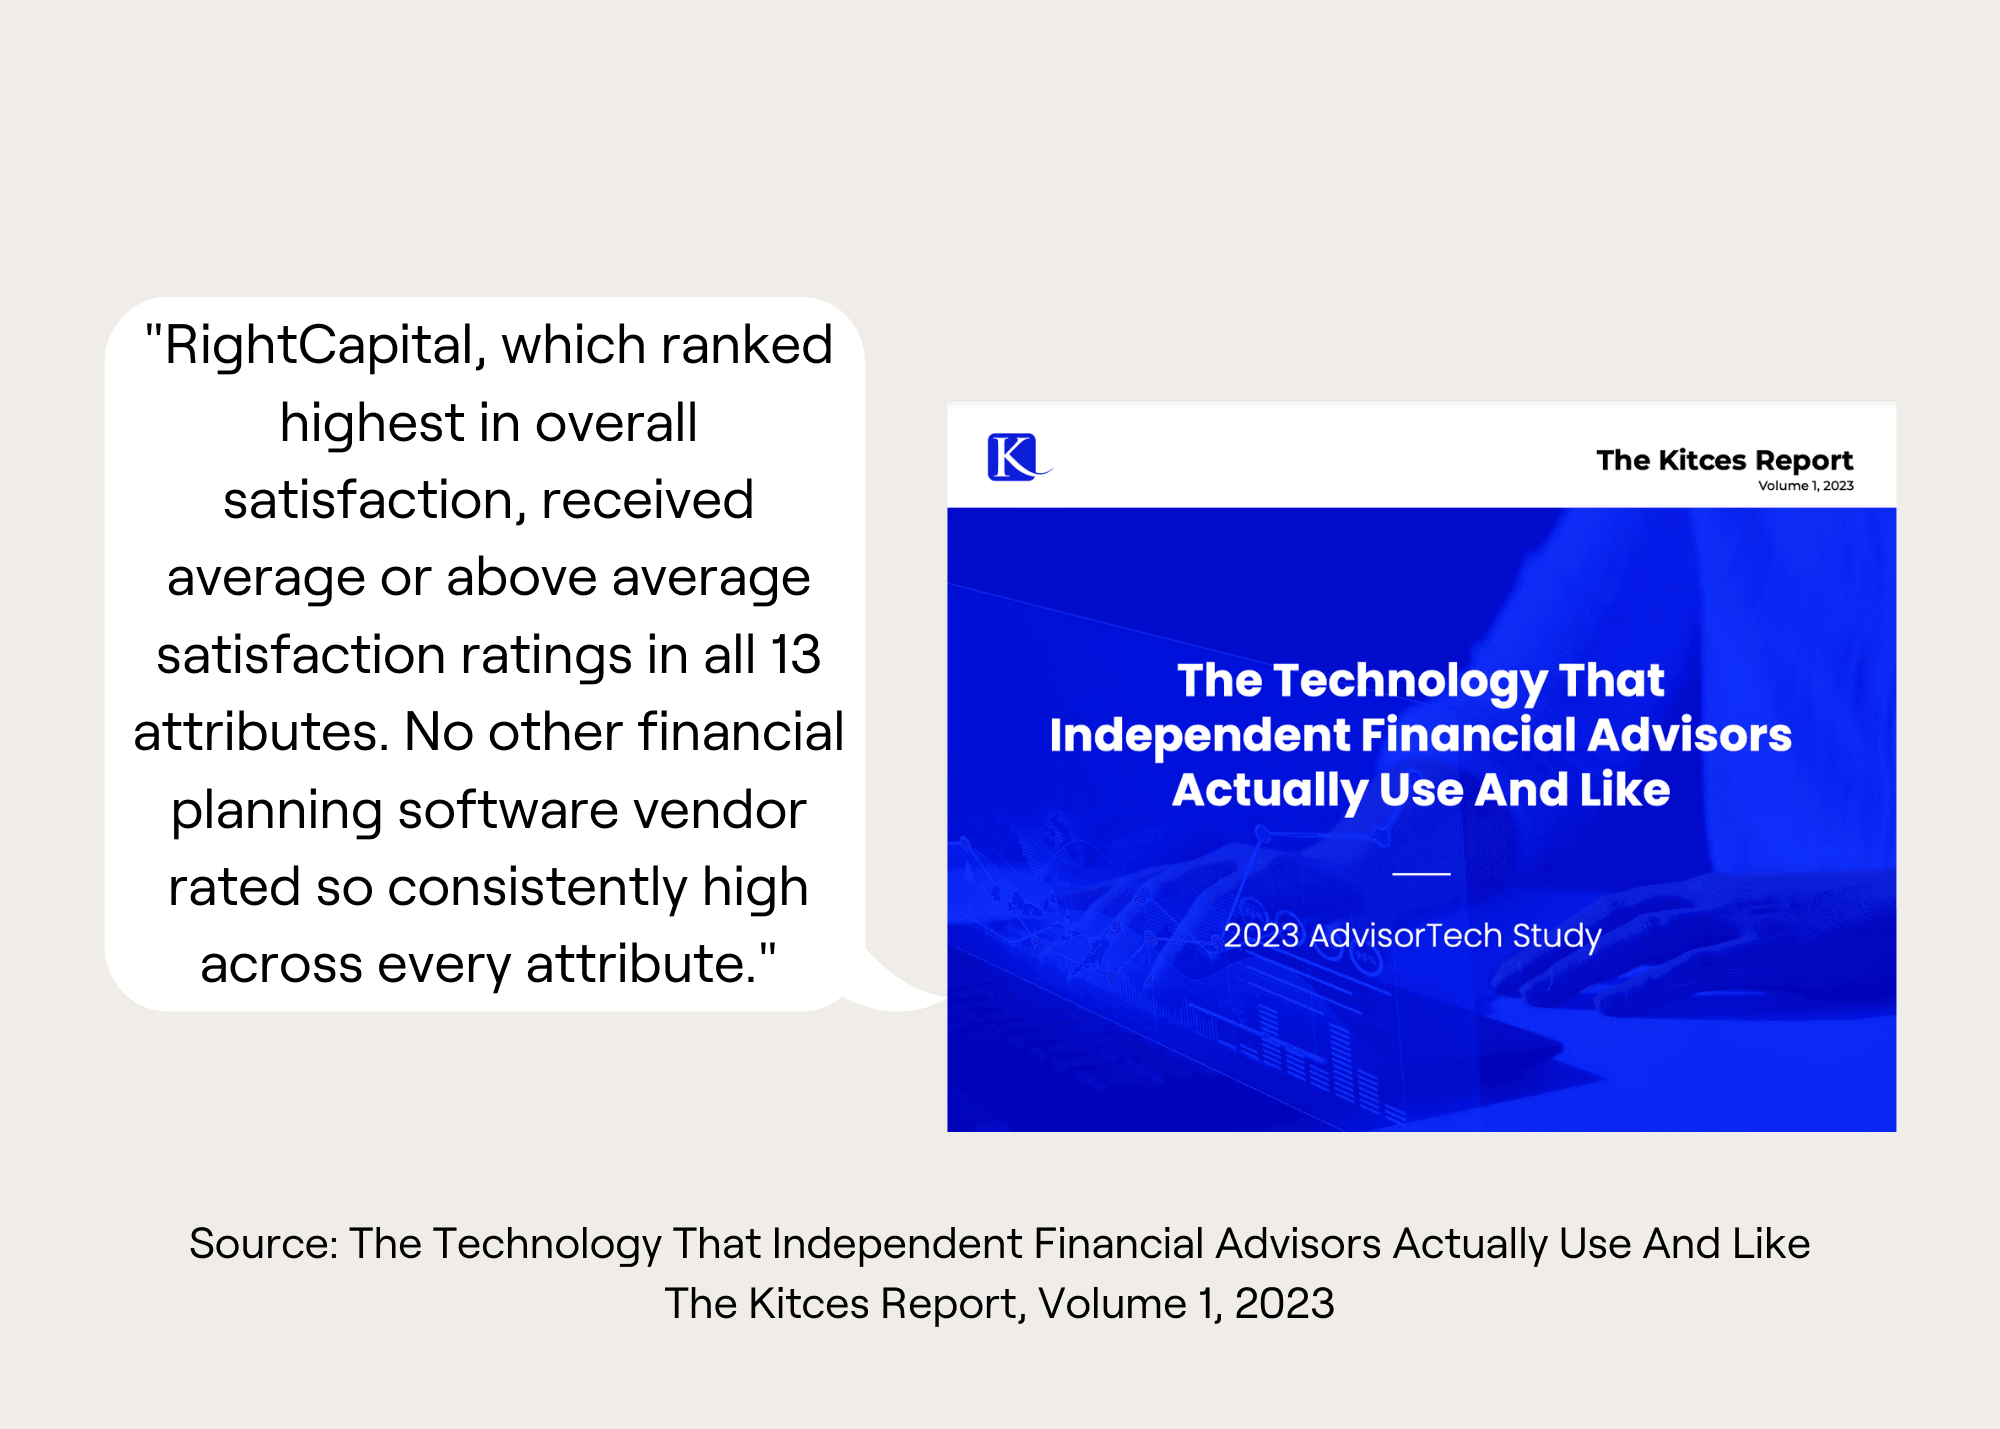 Quote from Kitces Report on "The Technology That Independent Financial Advisors Actually Use and Like": "RightCapital, which ranked highest in overall satisfaction, received average or above average satisfaction ratings in all 13 attributes. No other financial planning software vendor rated so consistently high across every attribute."